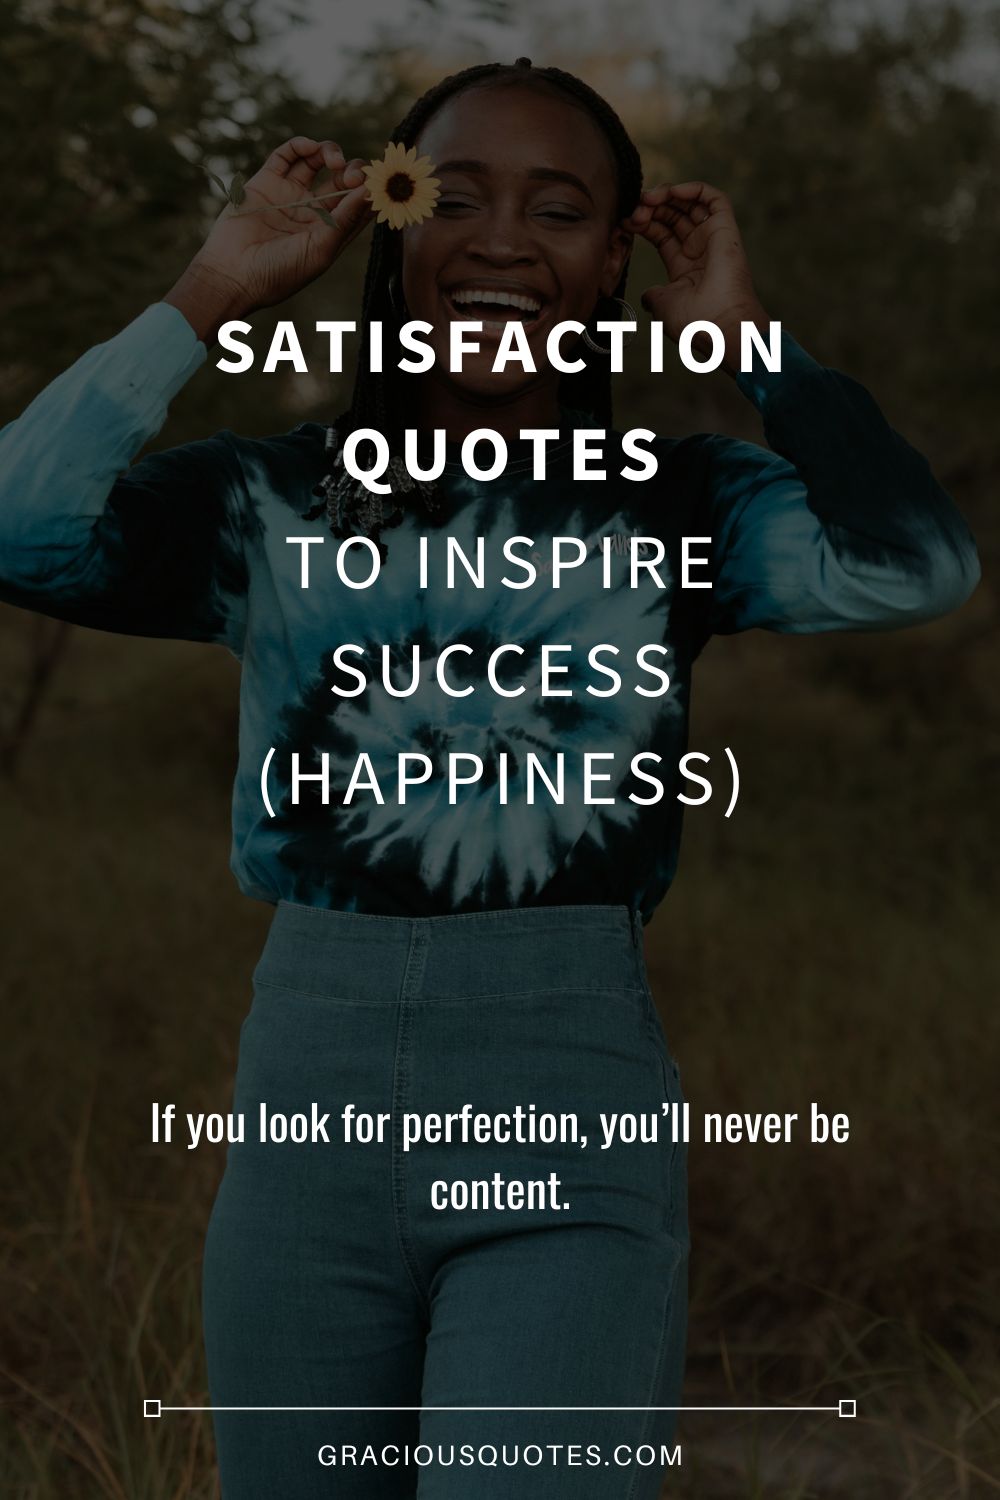 Satisfaction Quotes to Inspire Success (HAPPINESS) - Gracious Quotes